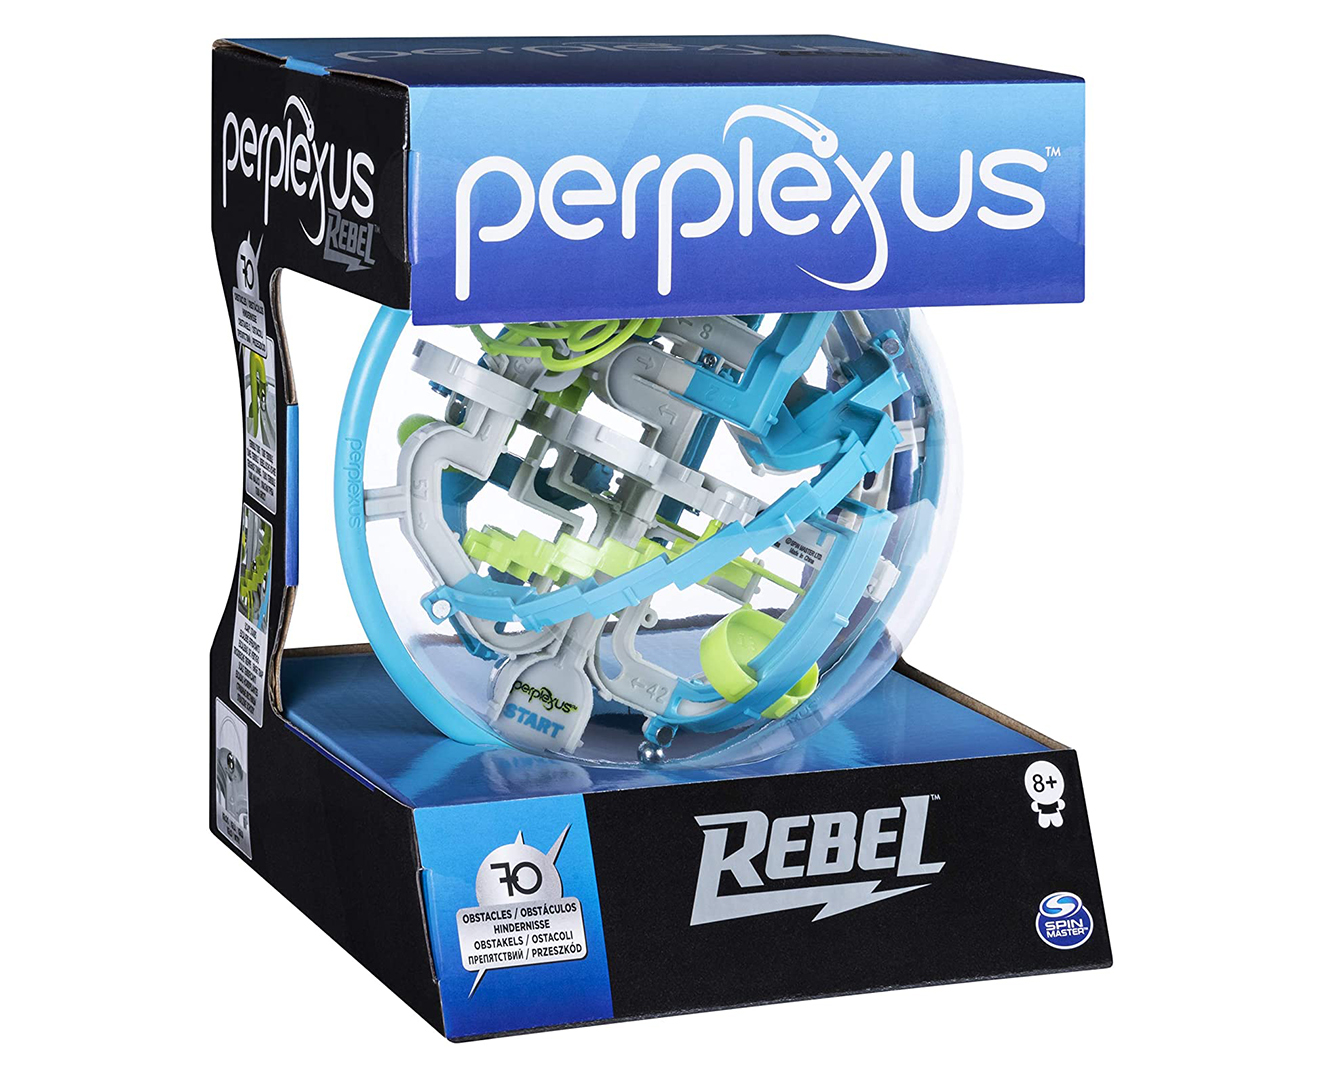 Chez Les Petits by Geahchan - Challenging Barriers •The Perplexus Rookie:  70 •The Perplexus Original: 100 •The Perplexus Epic: 125 The Perplexus 3D  Puzzle has finally landed! The Perplexus continues to evolve